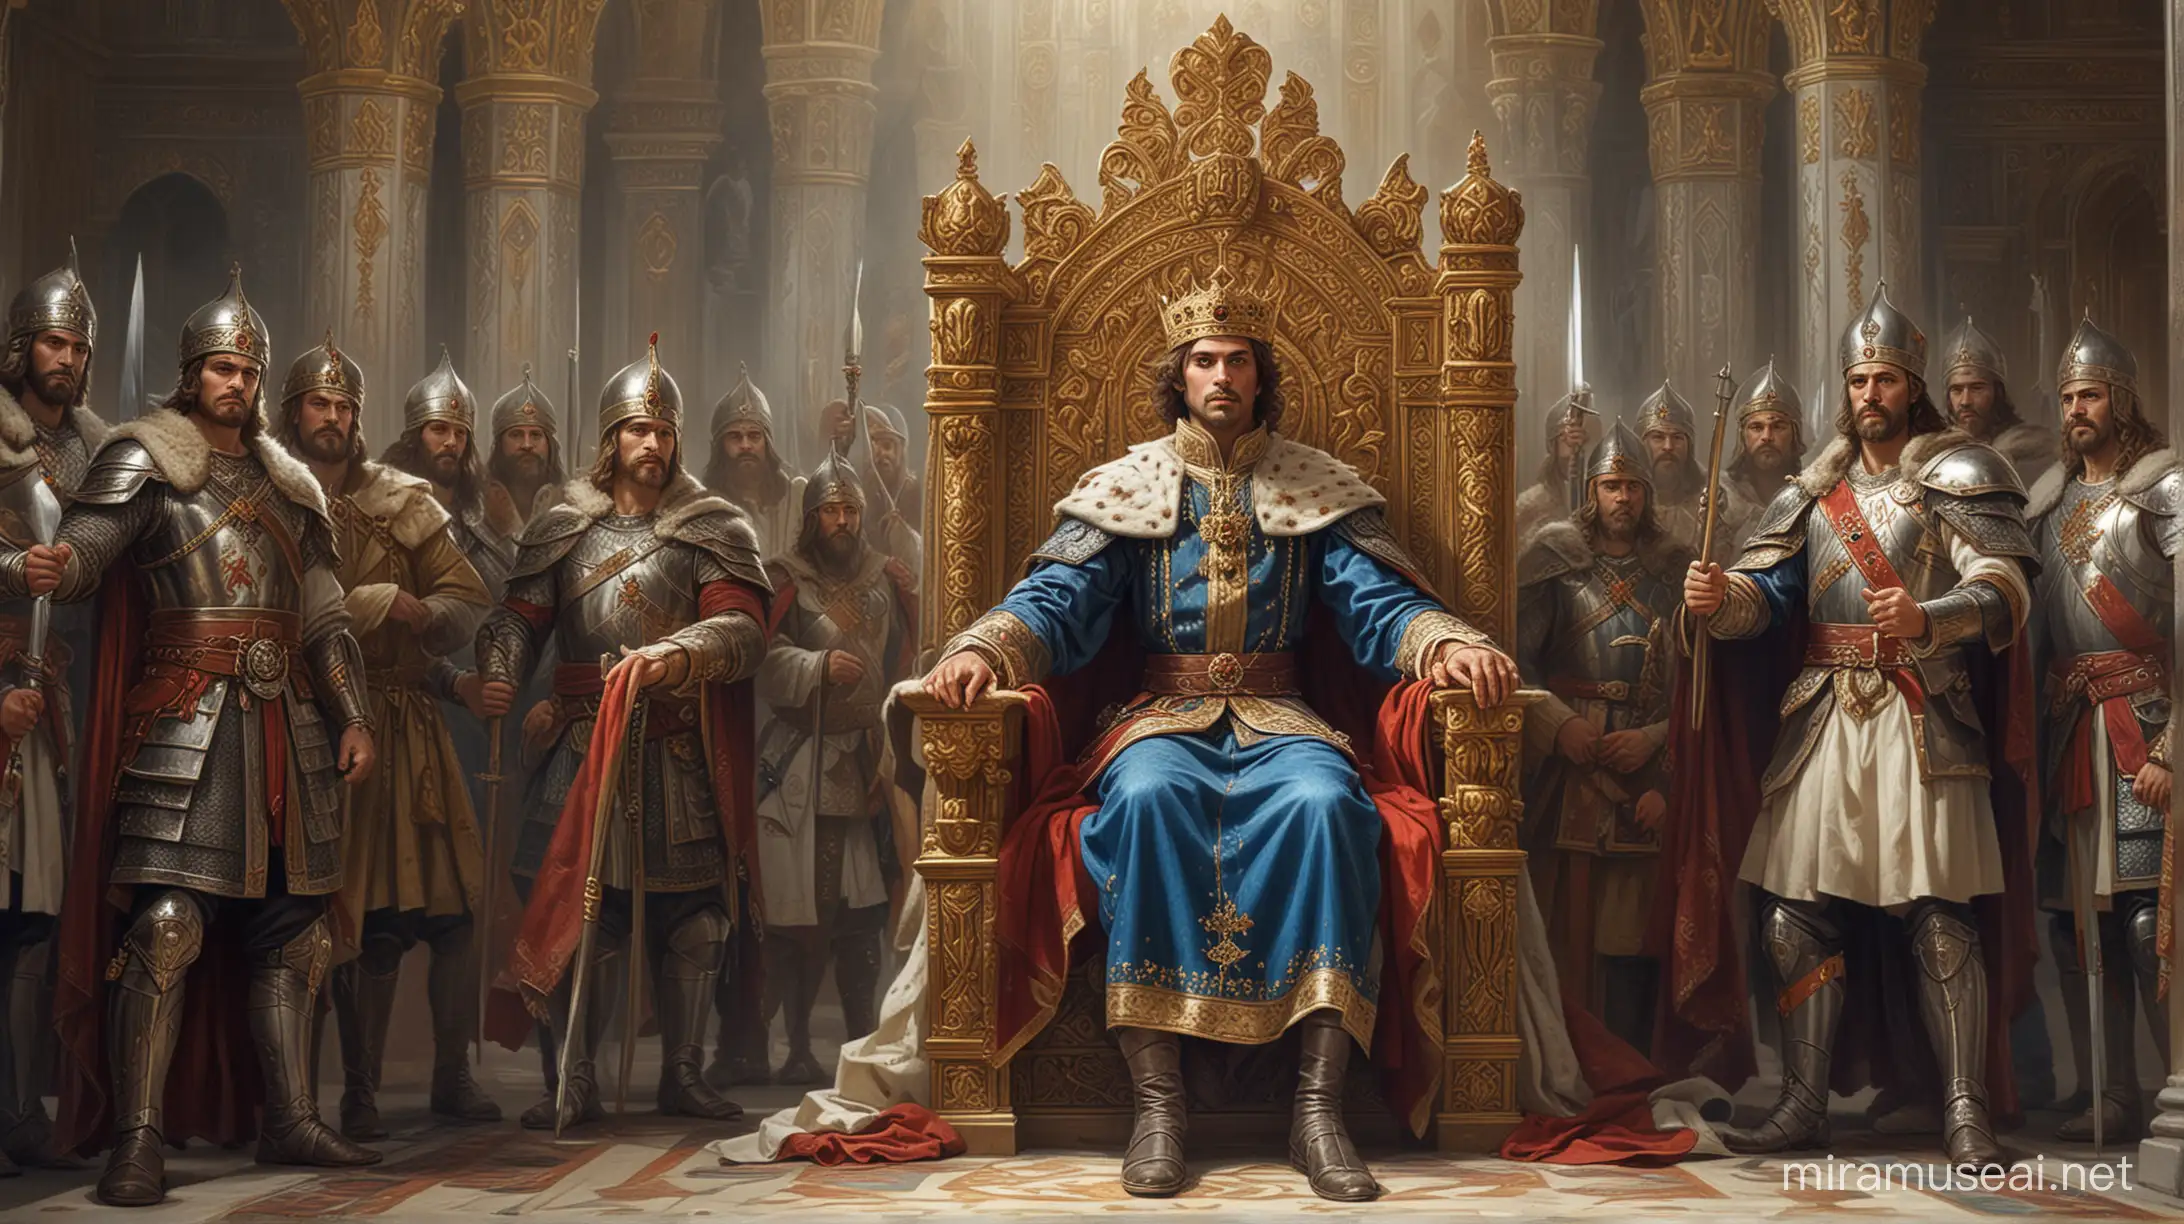 Ancient Russian Prince on Throne Surrounded by Boyars and Warriors